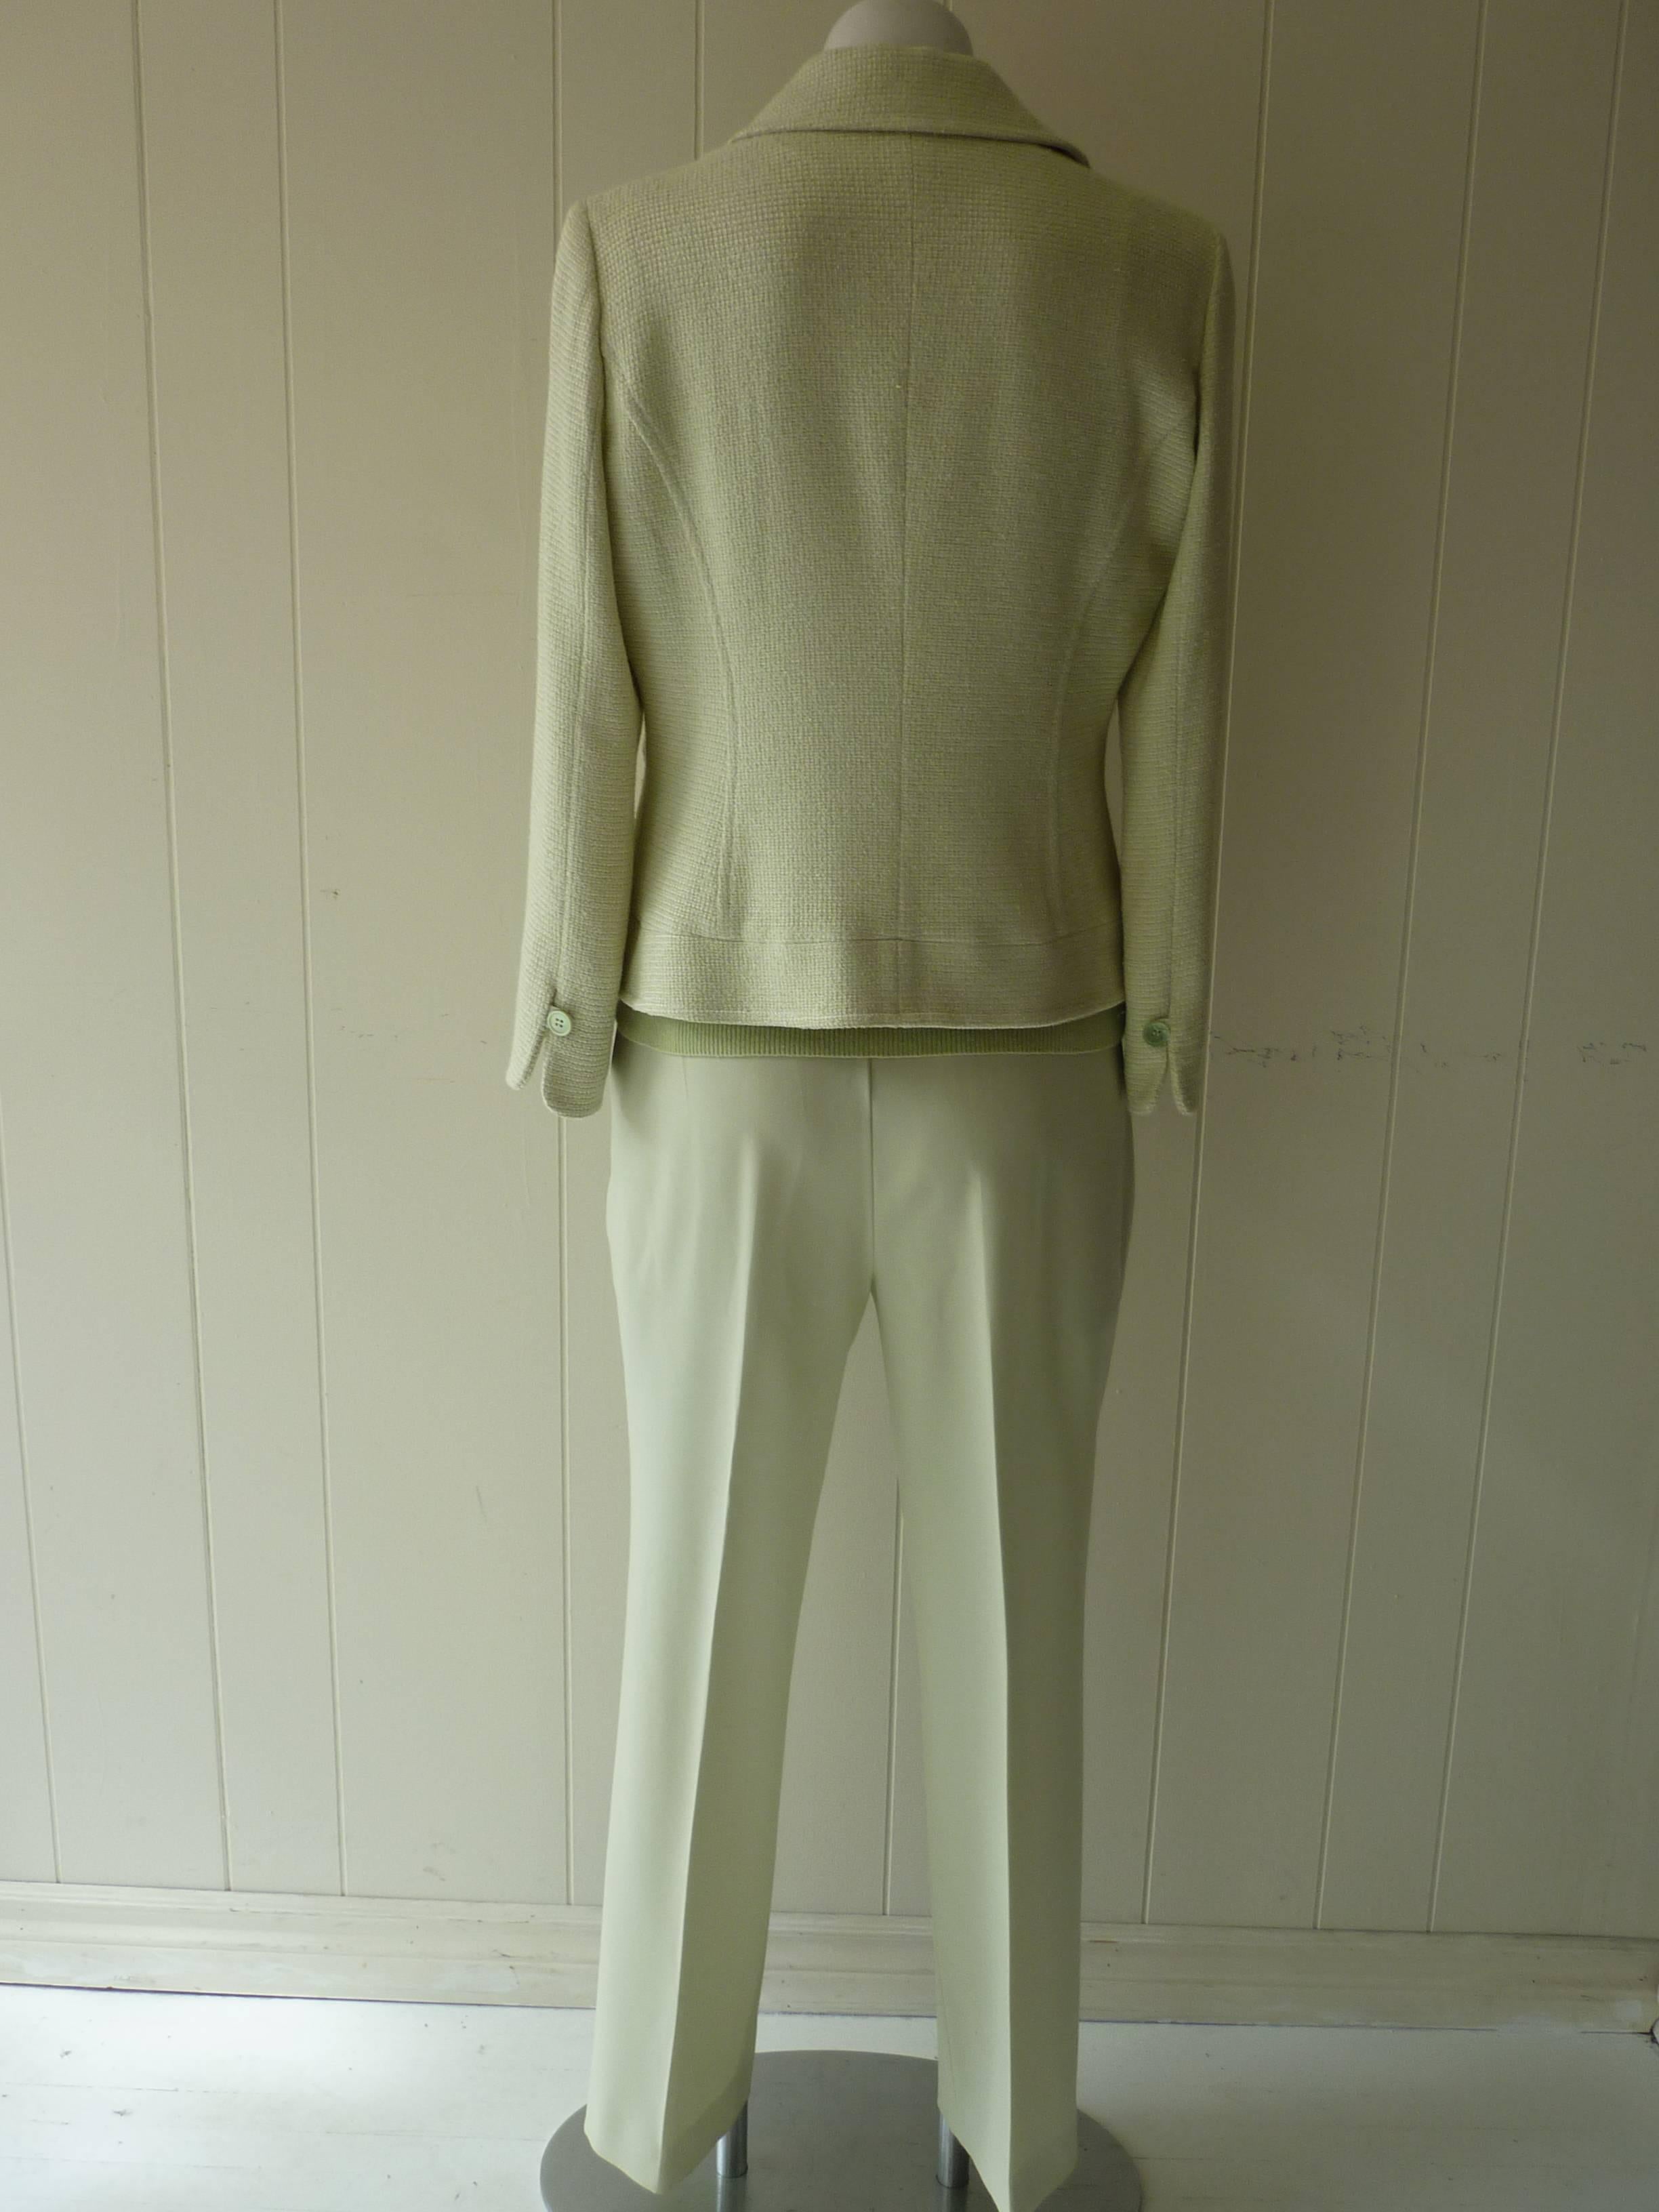 Exceptional suit! The jacket is made of weaved cotton and virgin wool with a silk lining; the pants are a light wool, and the sleeveless top is cashmere.

The jacket is a size 44 (Itl); has 2 flap pockets; the button holes are trimmed in a